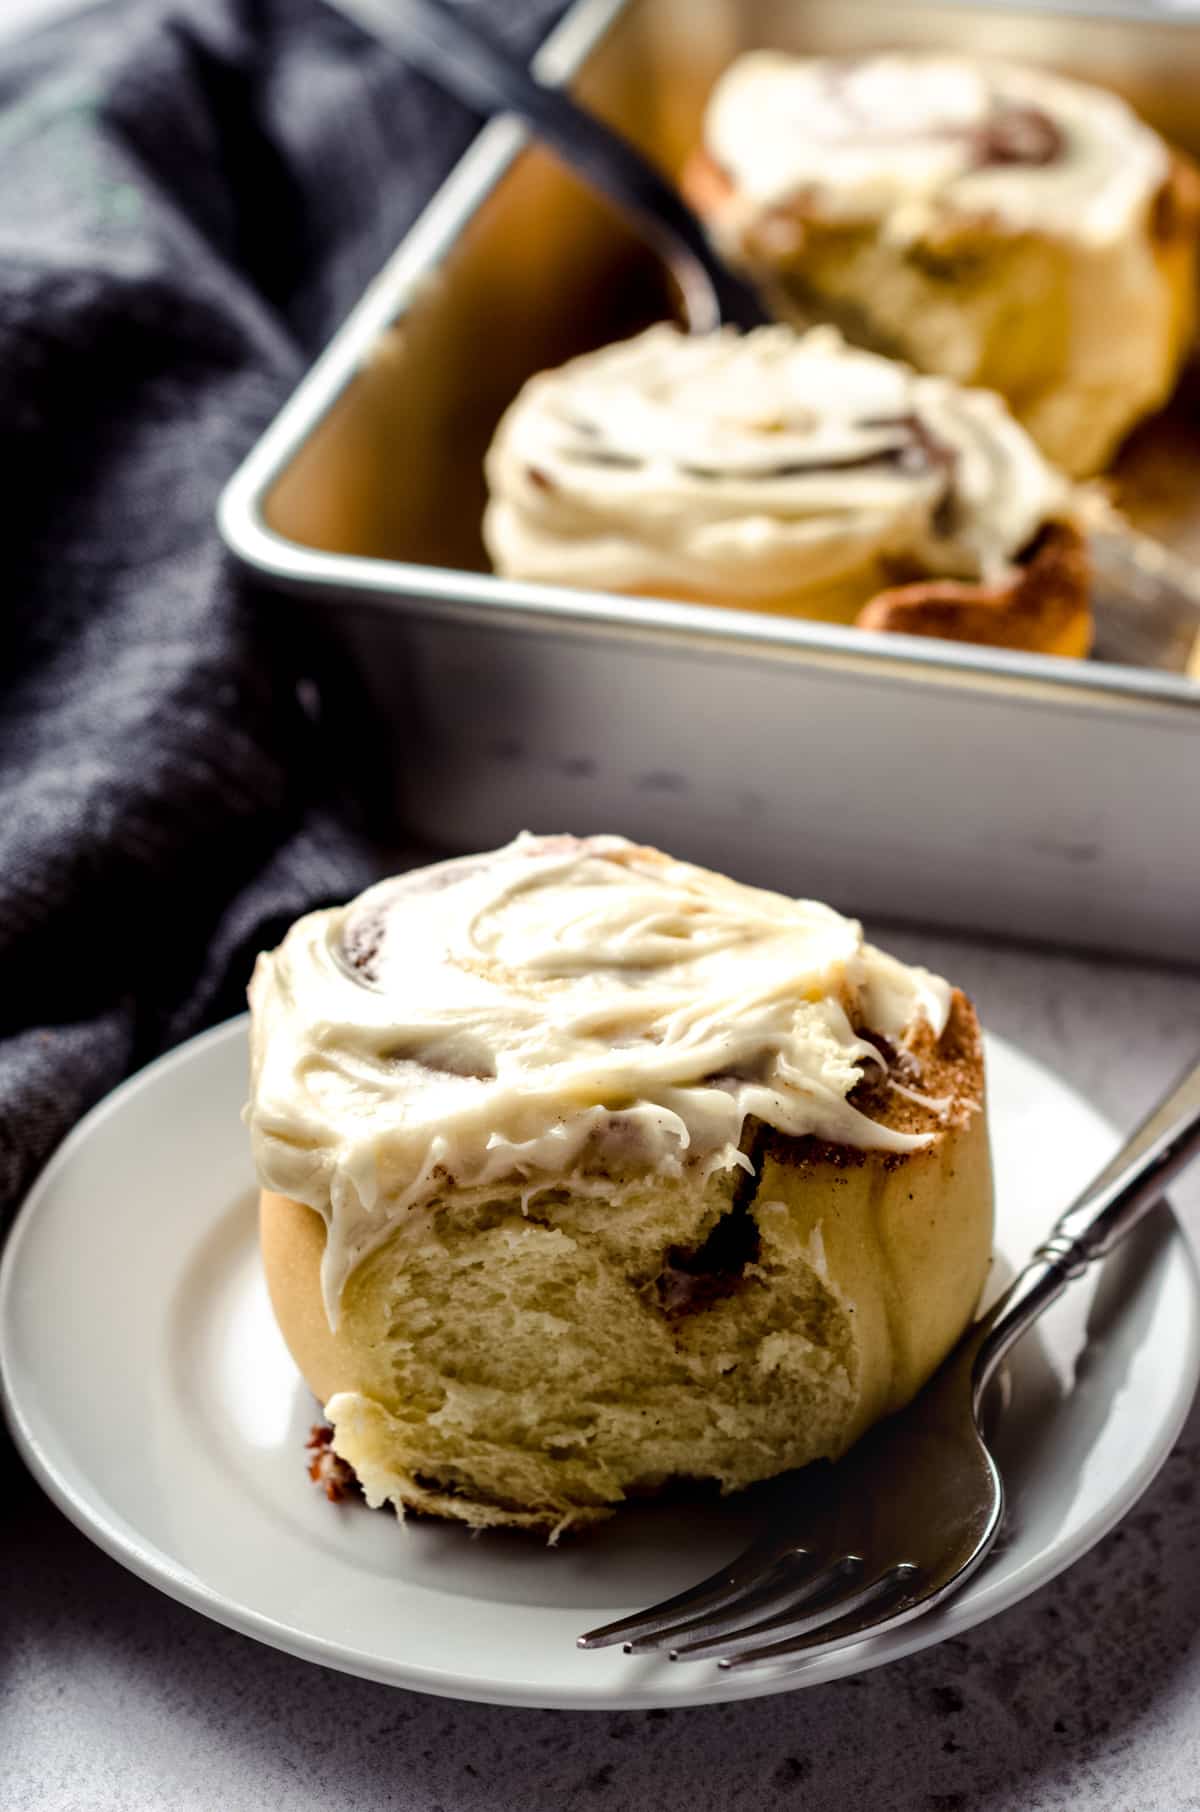 A fluffy cinnamon roll with cream cheese frosting on a plate with a fork.